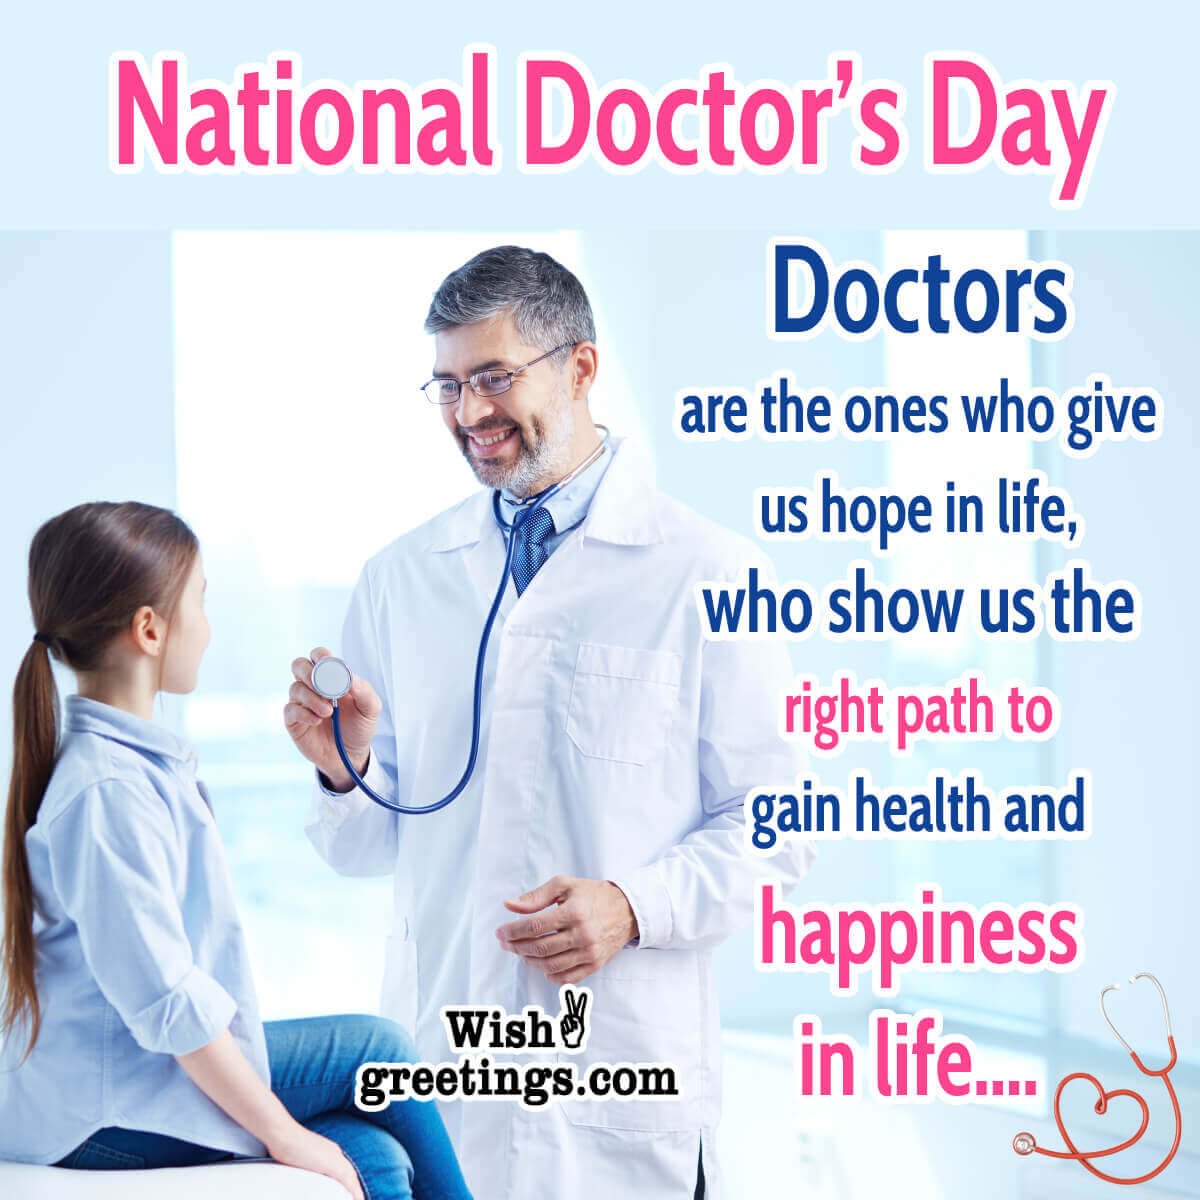 National Doctor’s Day Wishes, Quotes and Messages - Wish Greetings